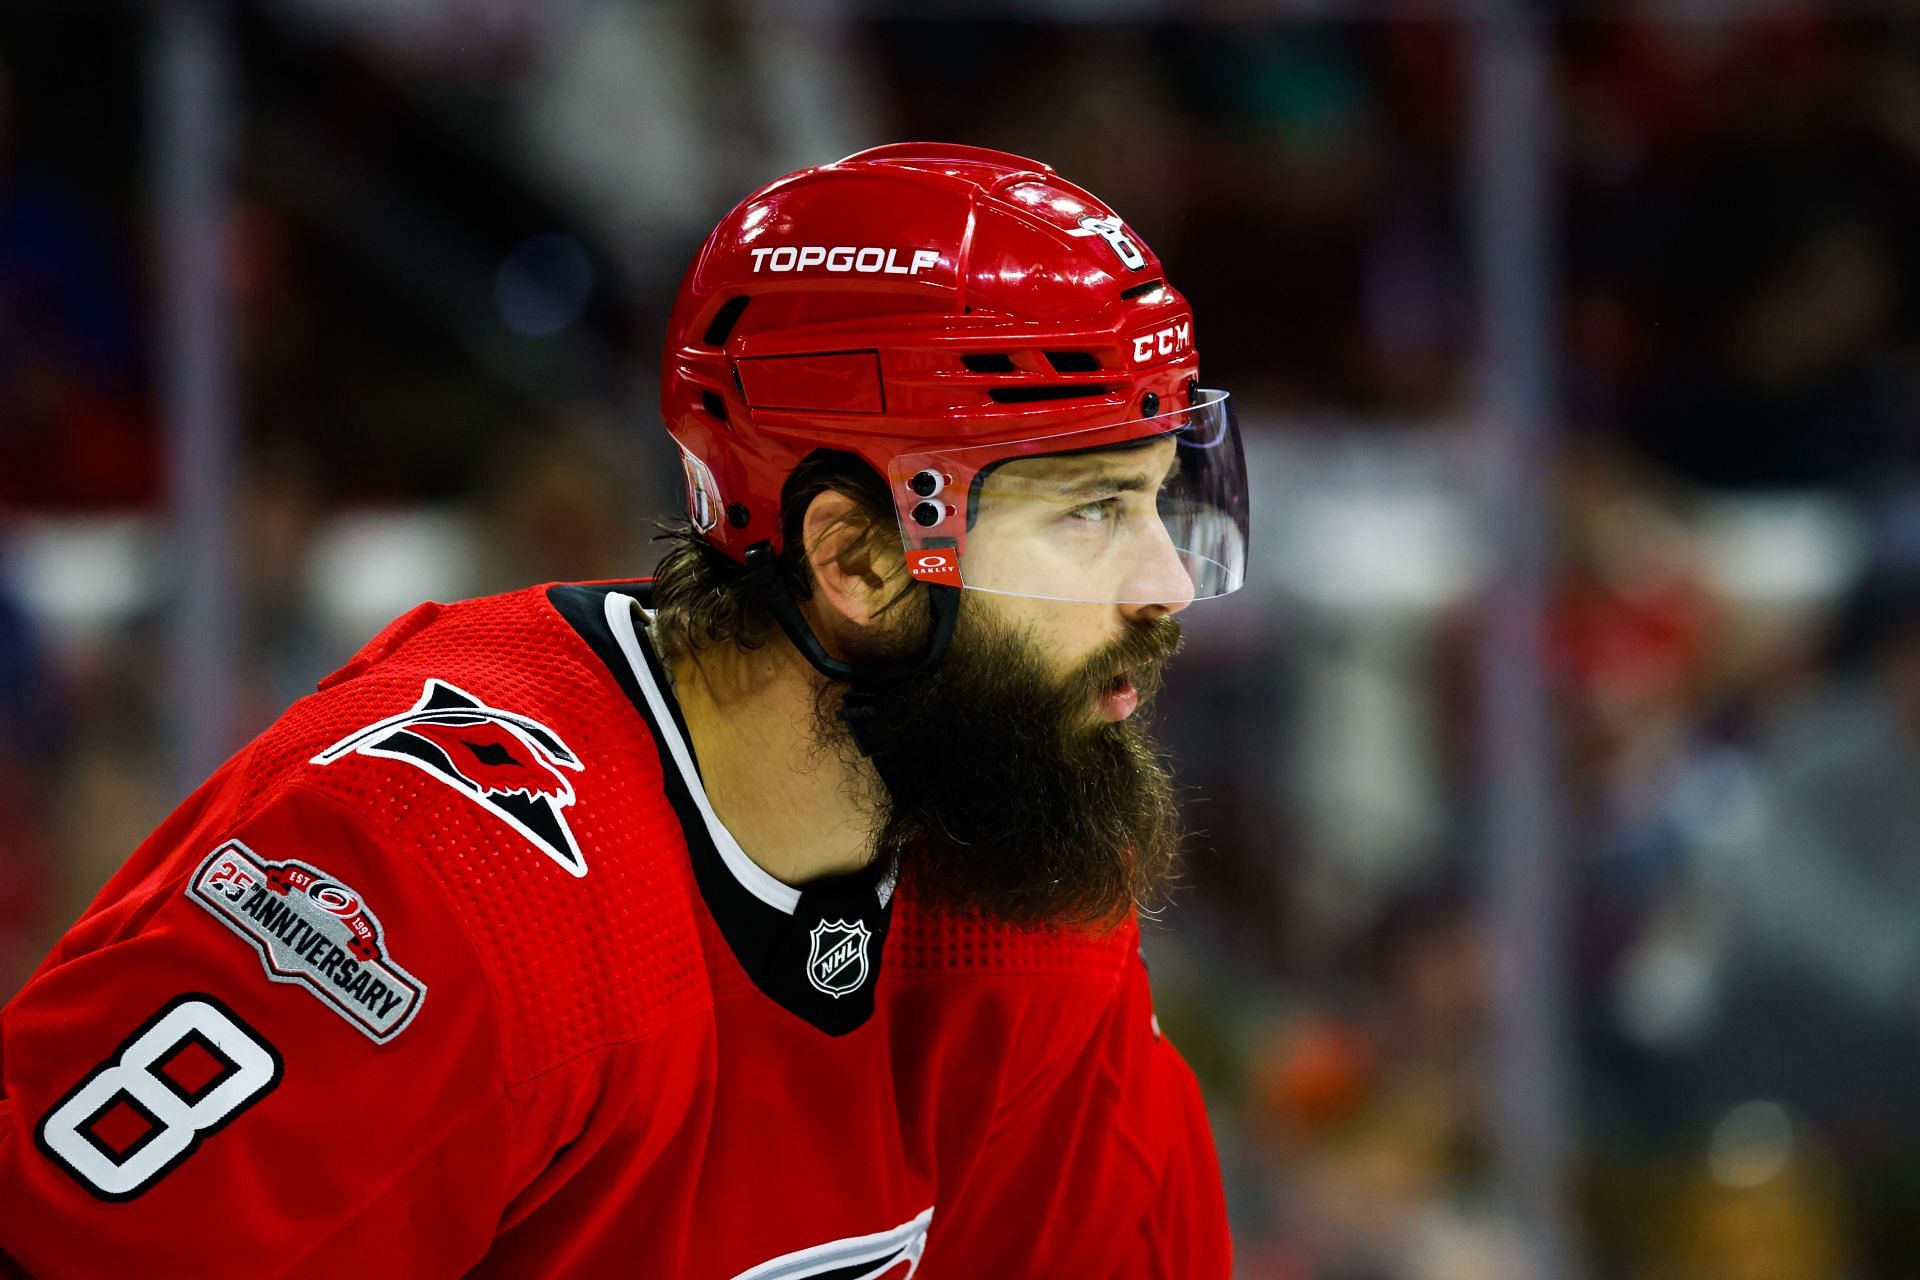 How good has Brent Burns been in the playoffs? Analyzing his career